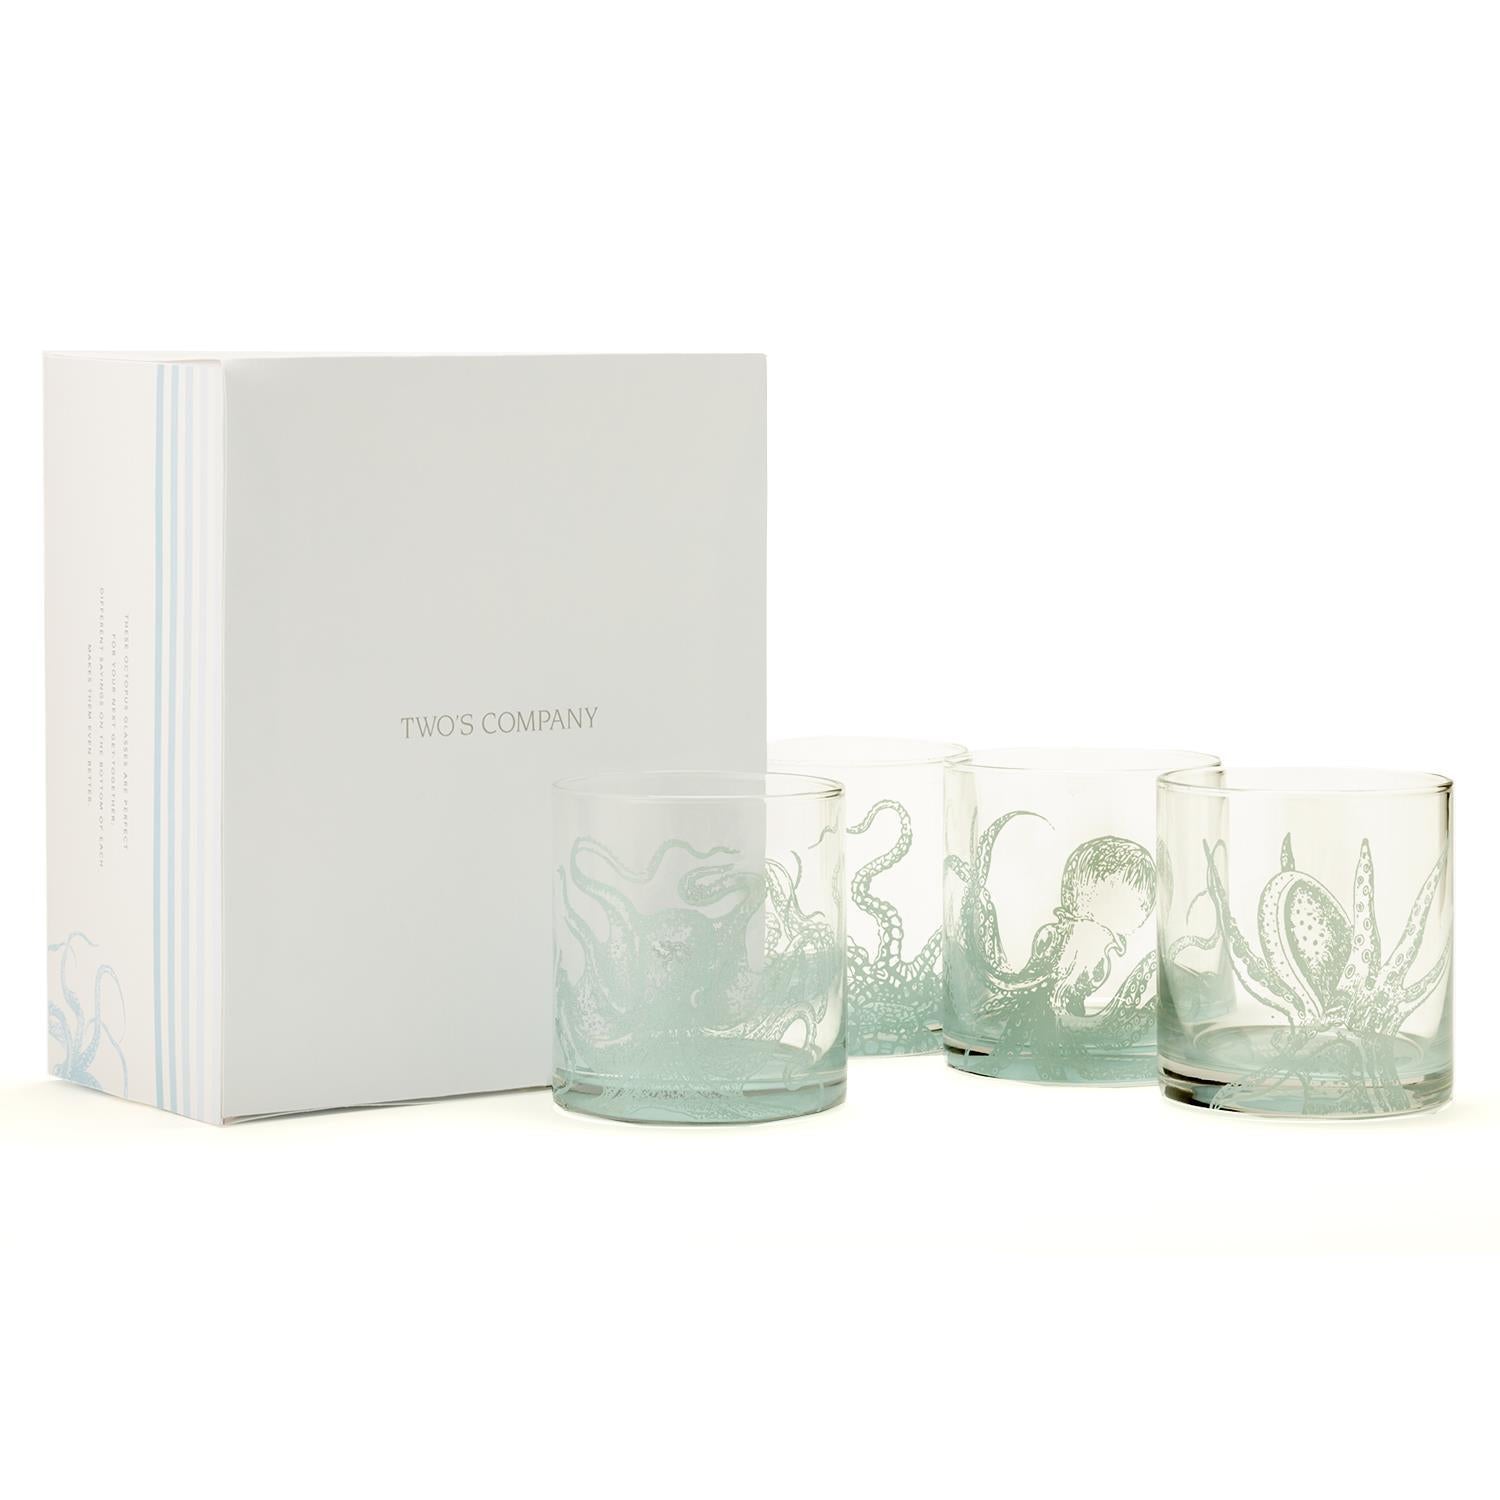 Two's Company Ocean Water Double Old-Fashioned Glasses in Gift Box (set of 4)